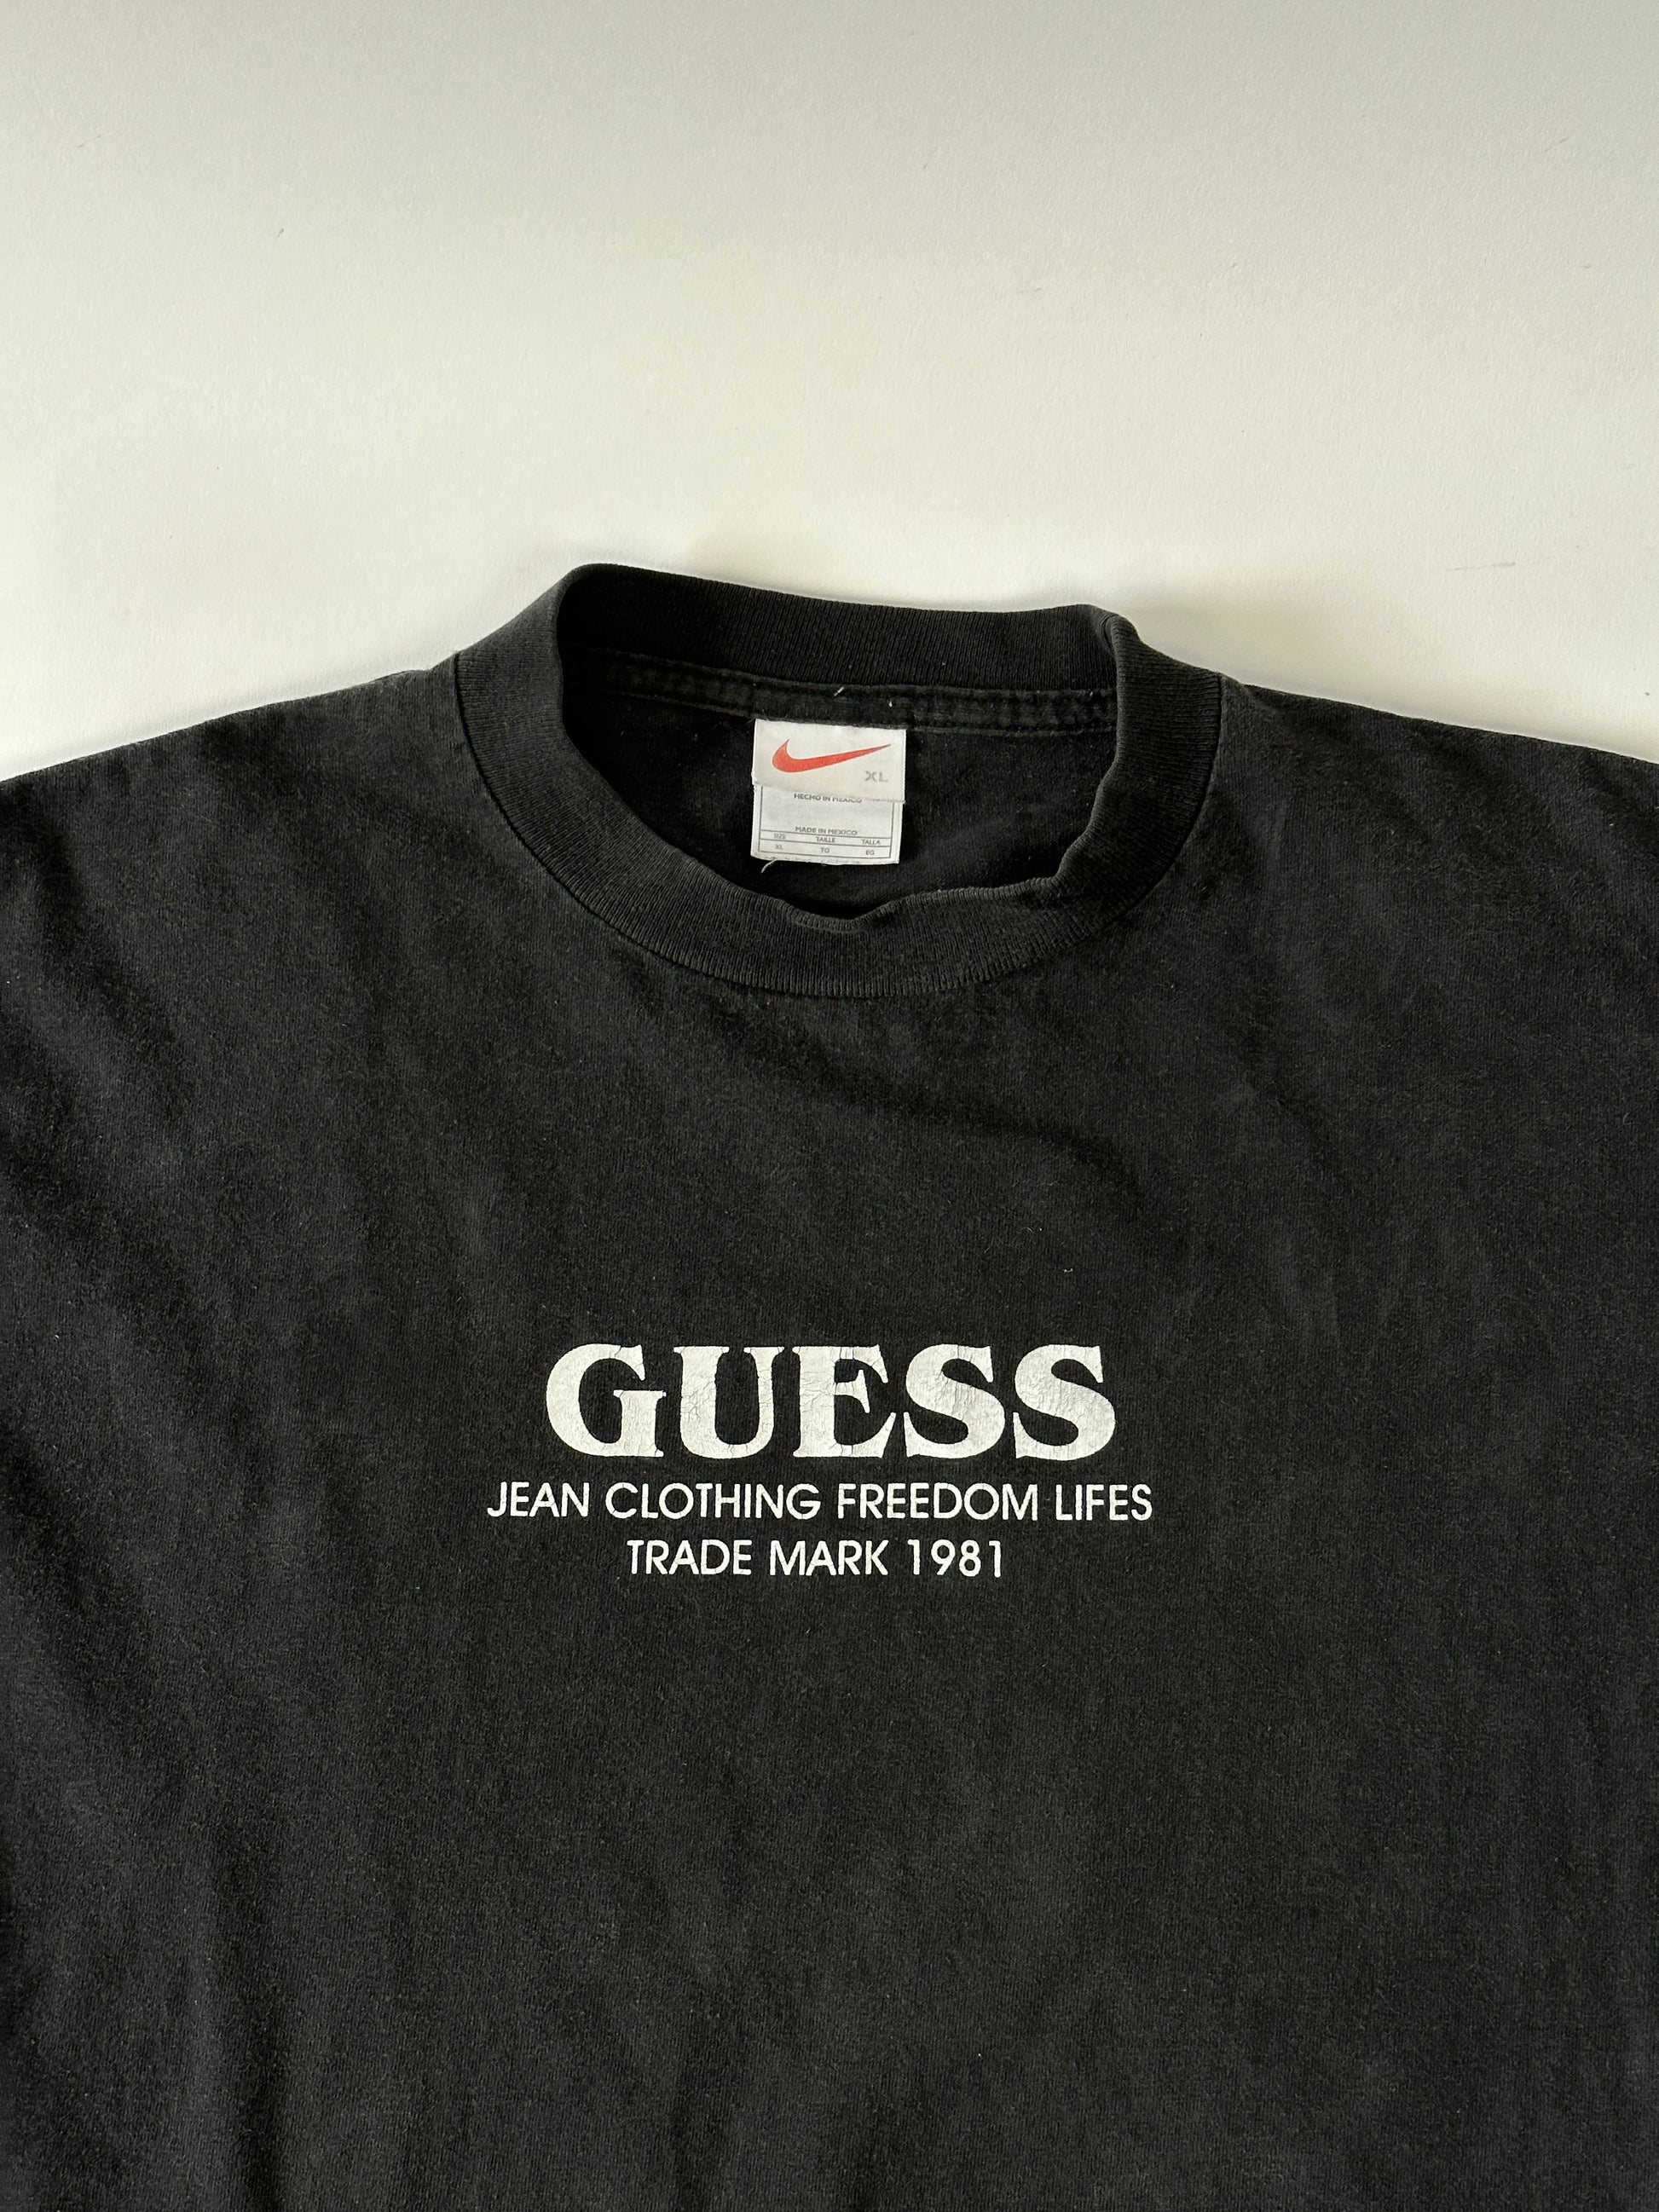 Guess Vintage T-shirt – Ropa Chidx